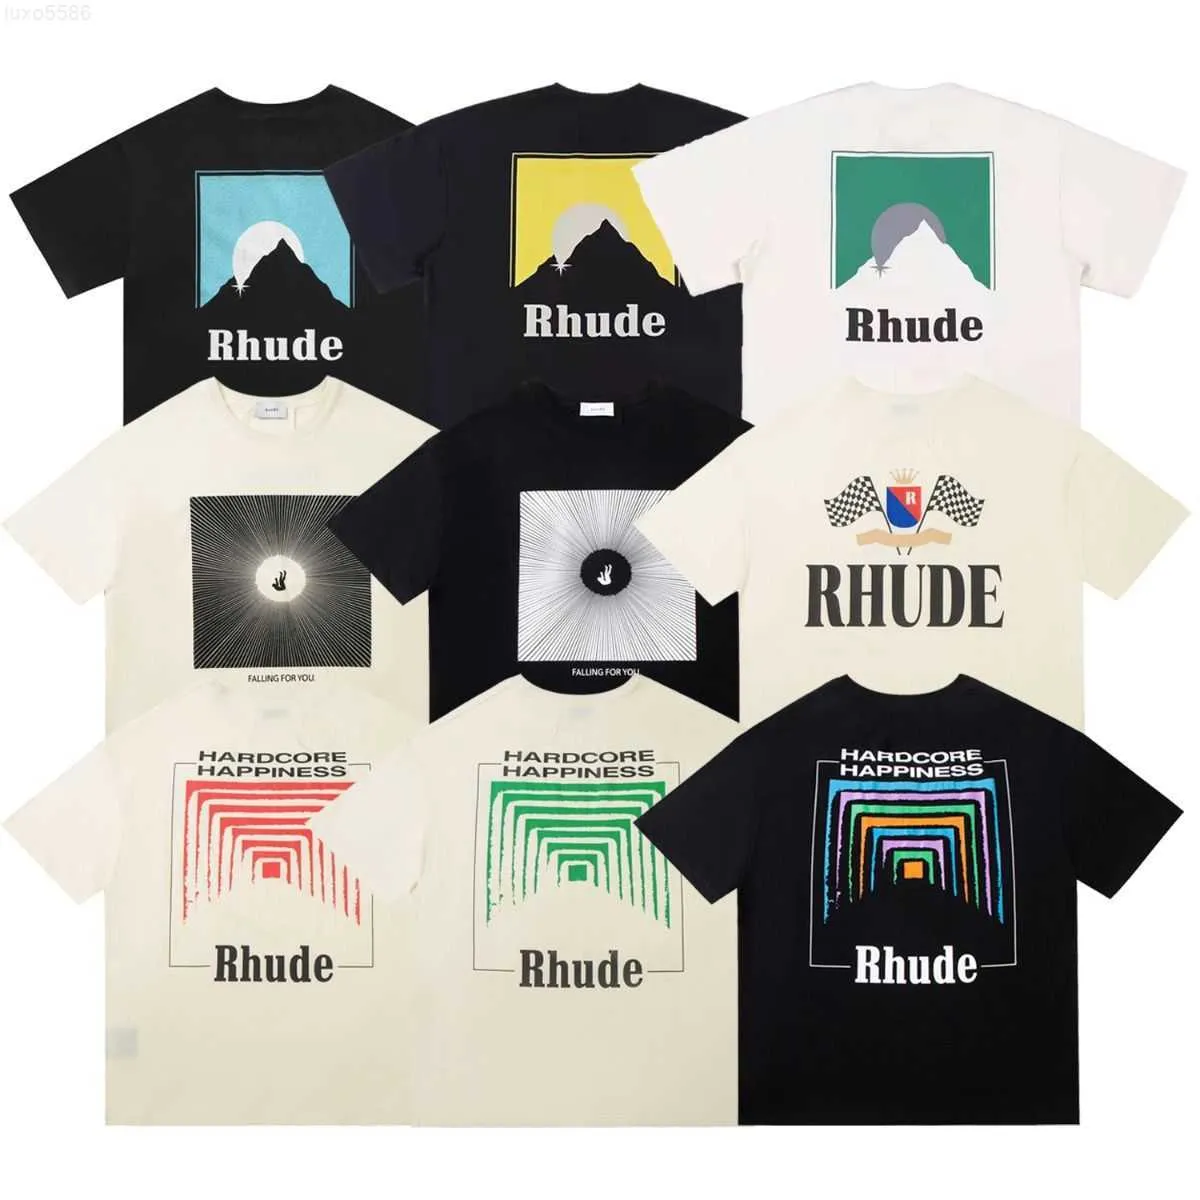 RH Designers Summer Mens Rhude T Shirts For Mens Tops Letter Polos Shirt Embroidery Womens Tshirts Clothing Short Sleeved Large Plus Size Teessb9f